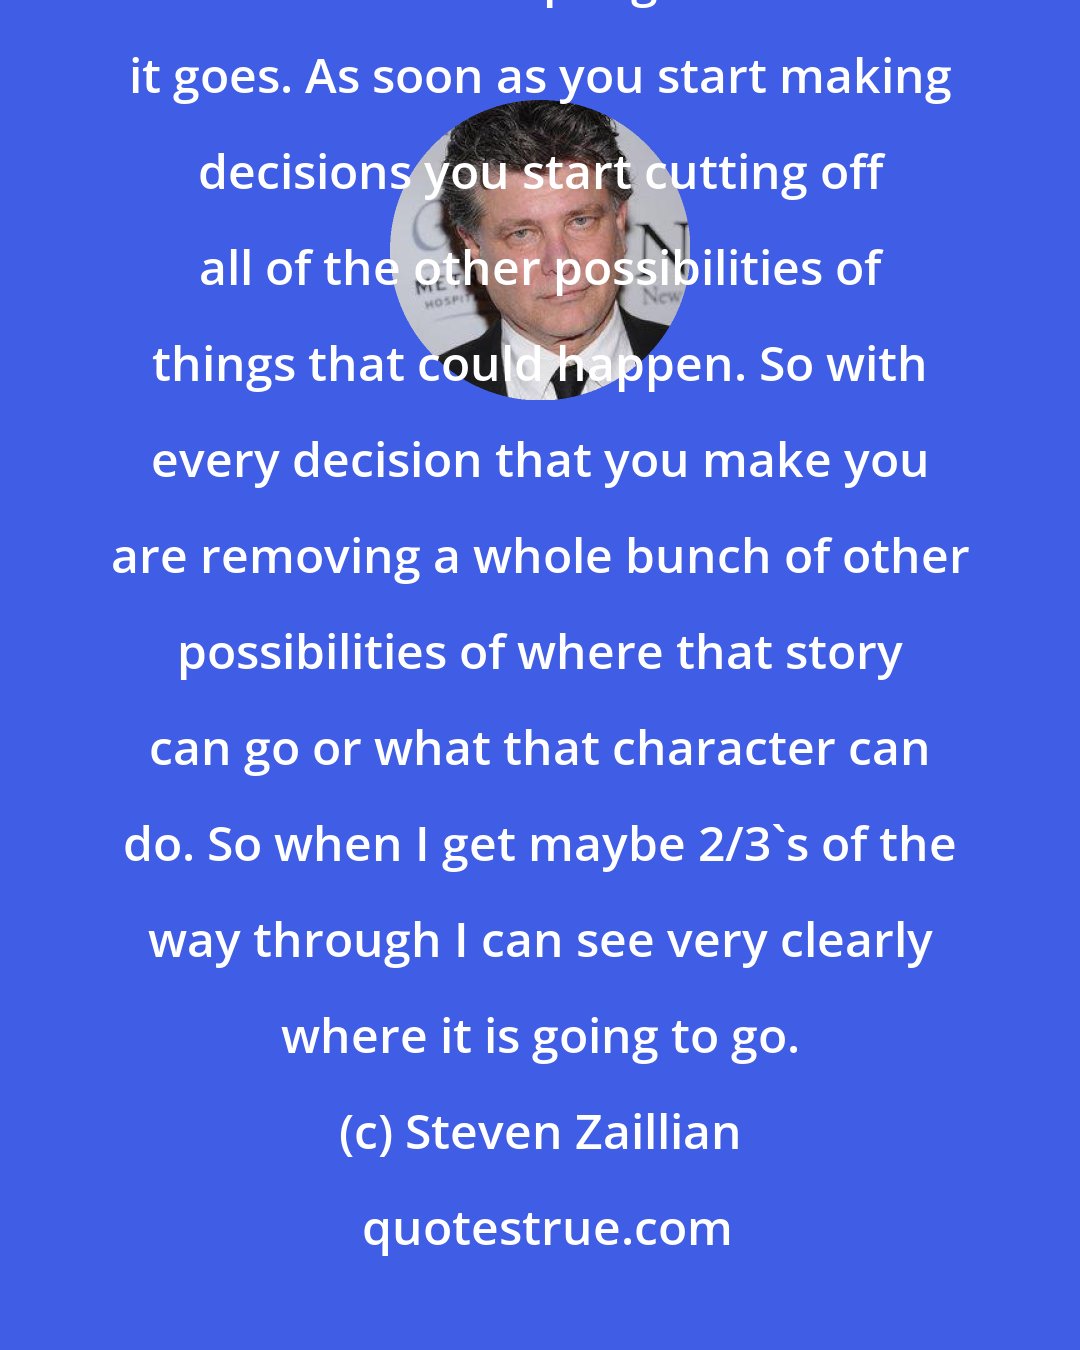 Steven Zaillian: When I am writing I don't set a certain number of pages. I do know that the further into a script I get the faster it goes. As soon as you start making decisions you start cutting off all of the other possibilities of things that could happen. So with every decision that you make you are removing a whole bunch of other possibilities of where that story can go or what that character can do. So when I get maybe 2/3's of the way through I can see very clearly where it is going to go.